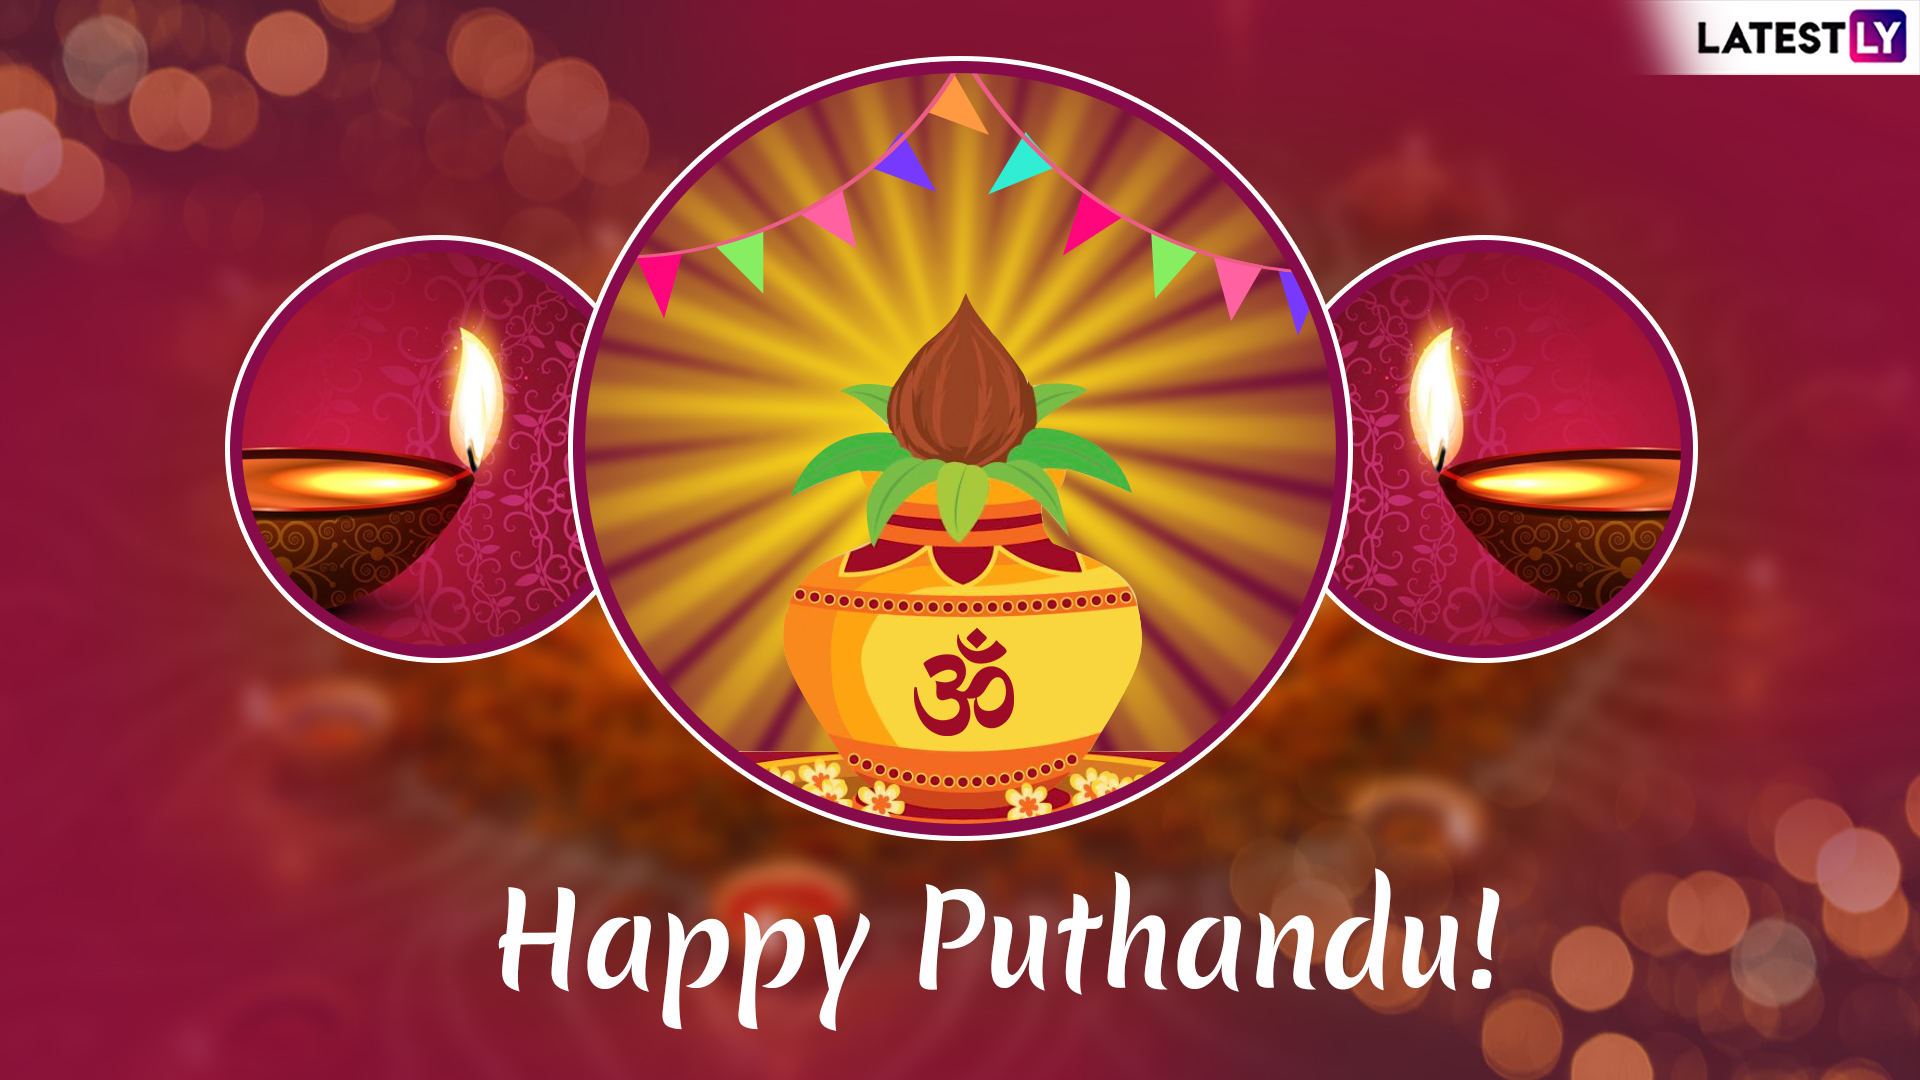 Puthandu Vazthukal Images & HD Wallpapers for Free Download Online ...